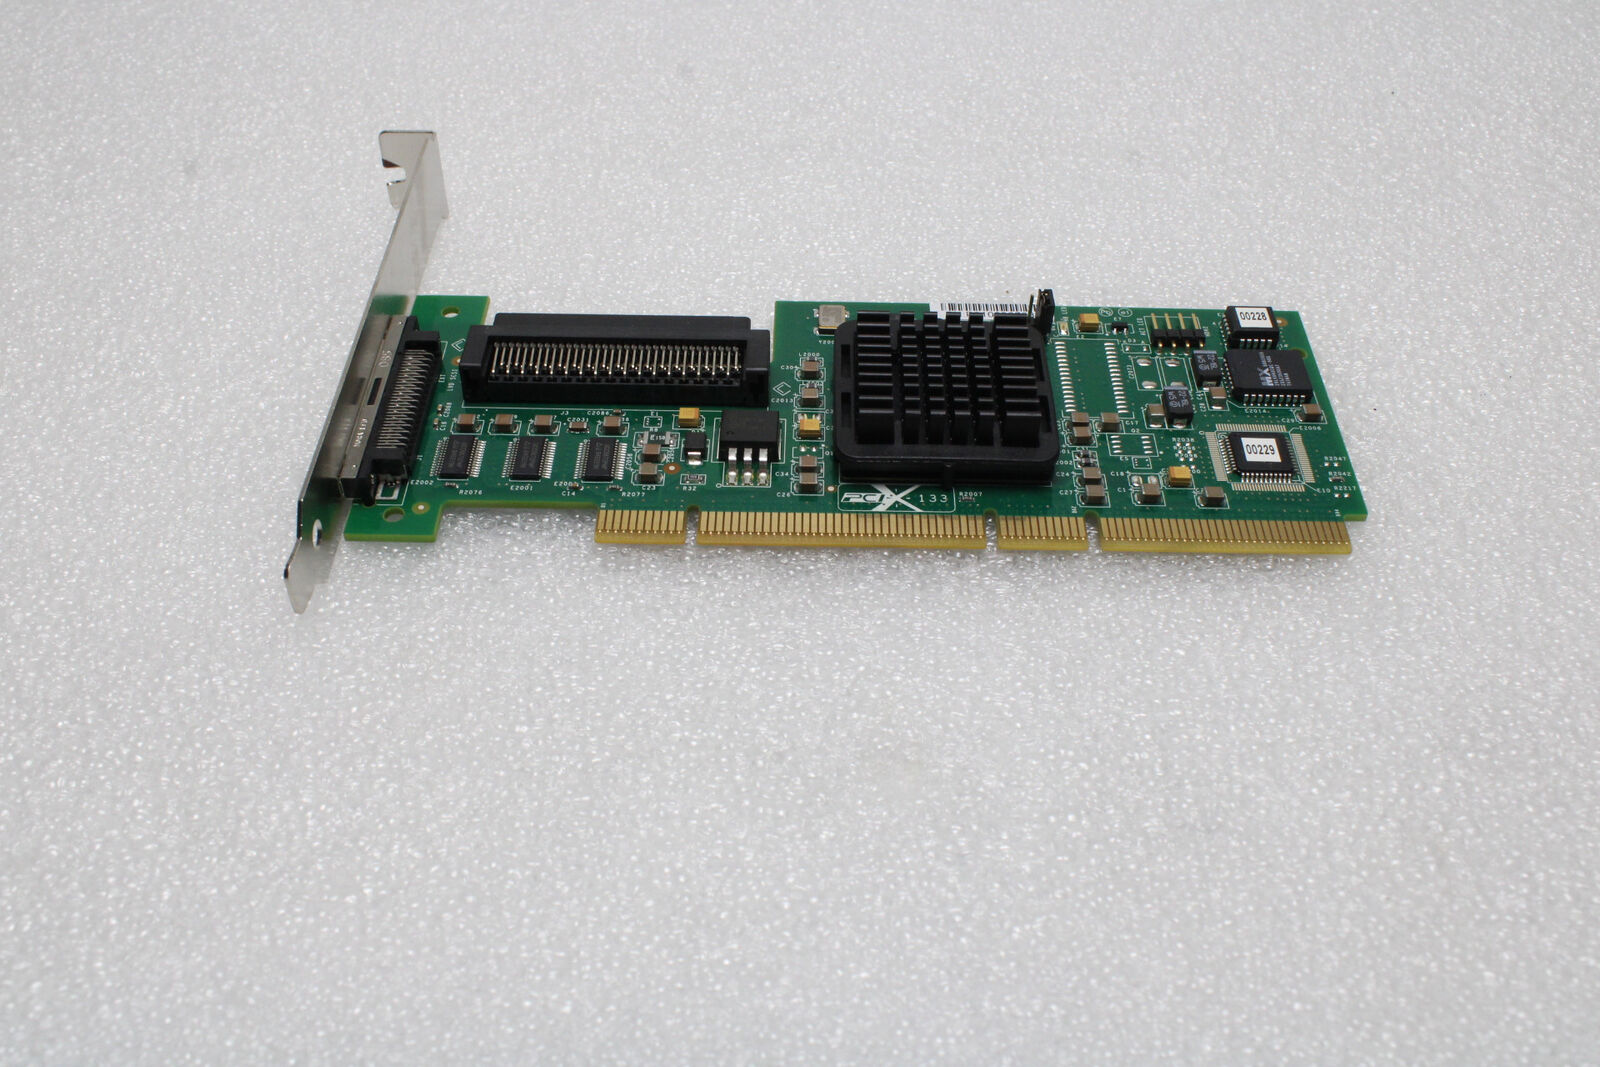 HP LSI20320C- Single Channel 64Bit 133Mhz Pcix Ultra320 Scsi Host Bus Adapter